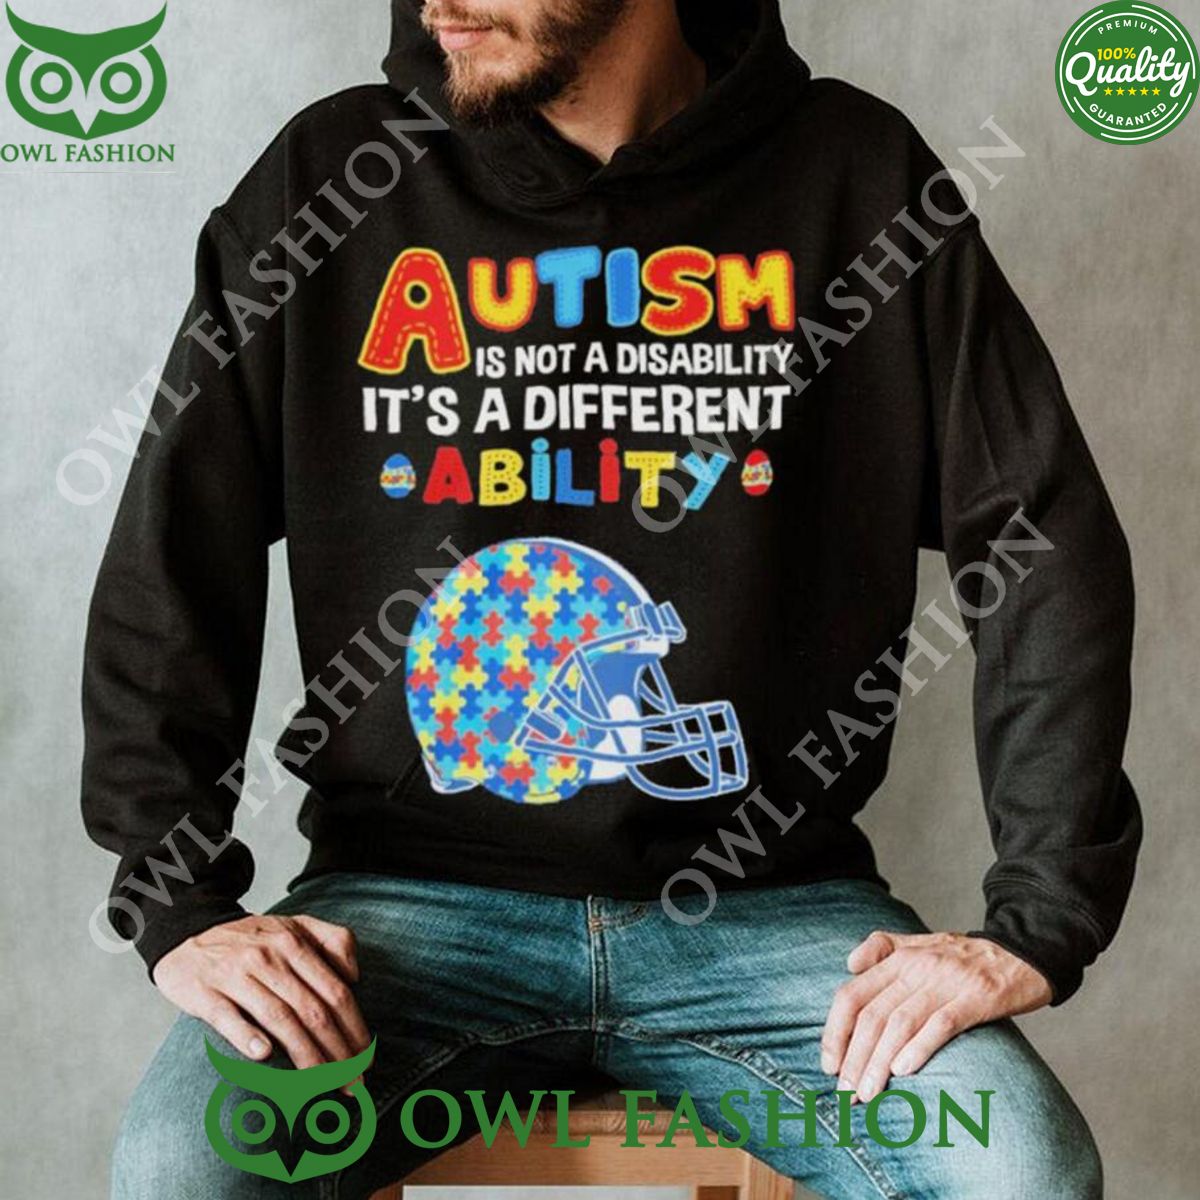 Cleveland Browns Autism NFL Autism 2D Hoodie Shirt Great, I liked it